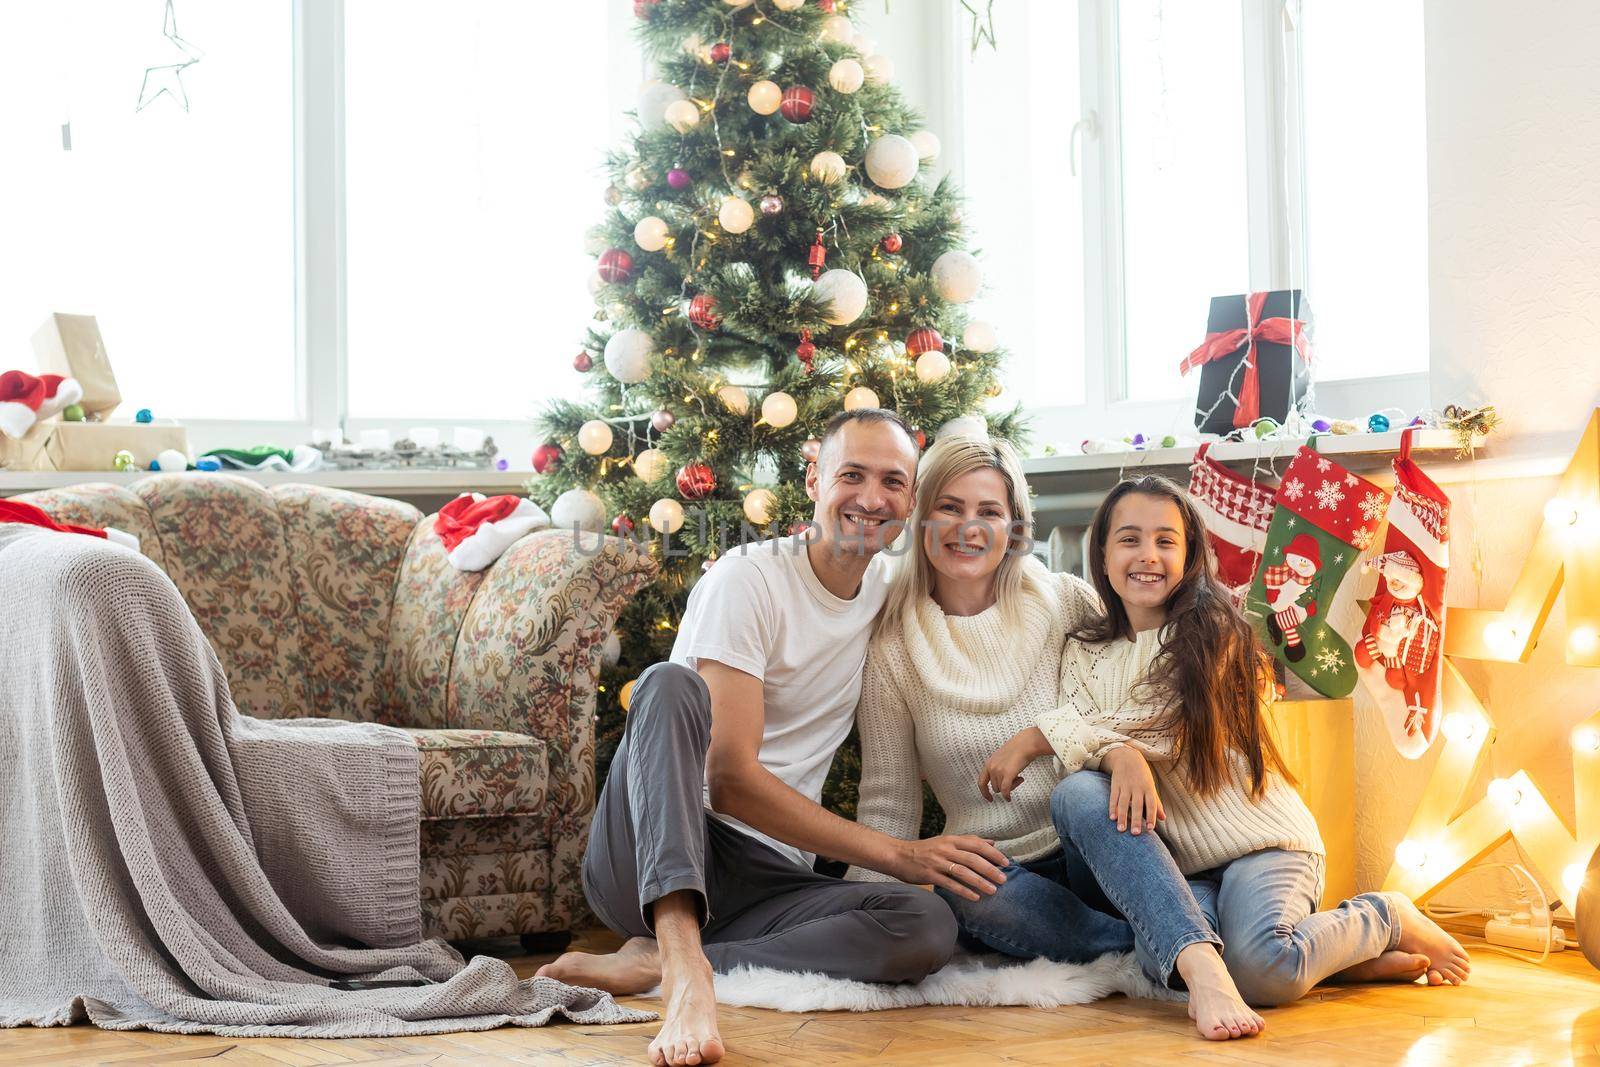 Beautiful young family enjoying their holiday time together, decorating Christmas tree, arranging the christmas lights and having fun